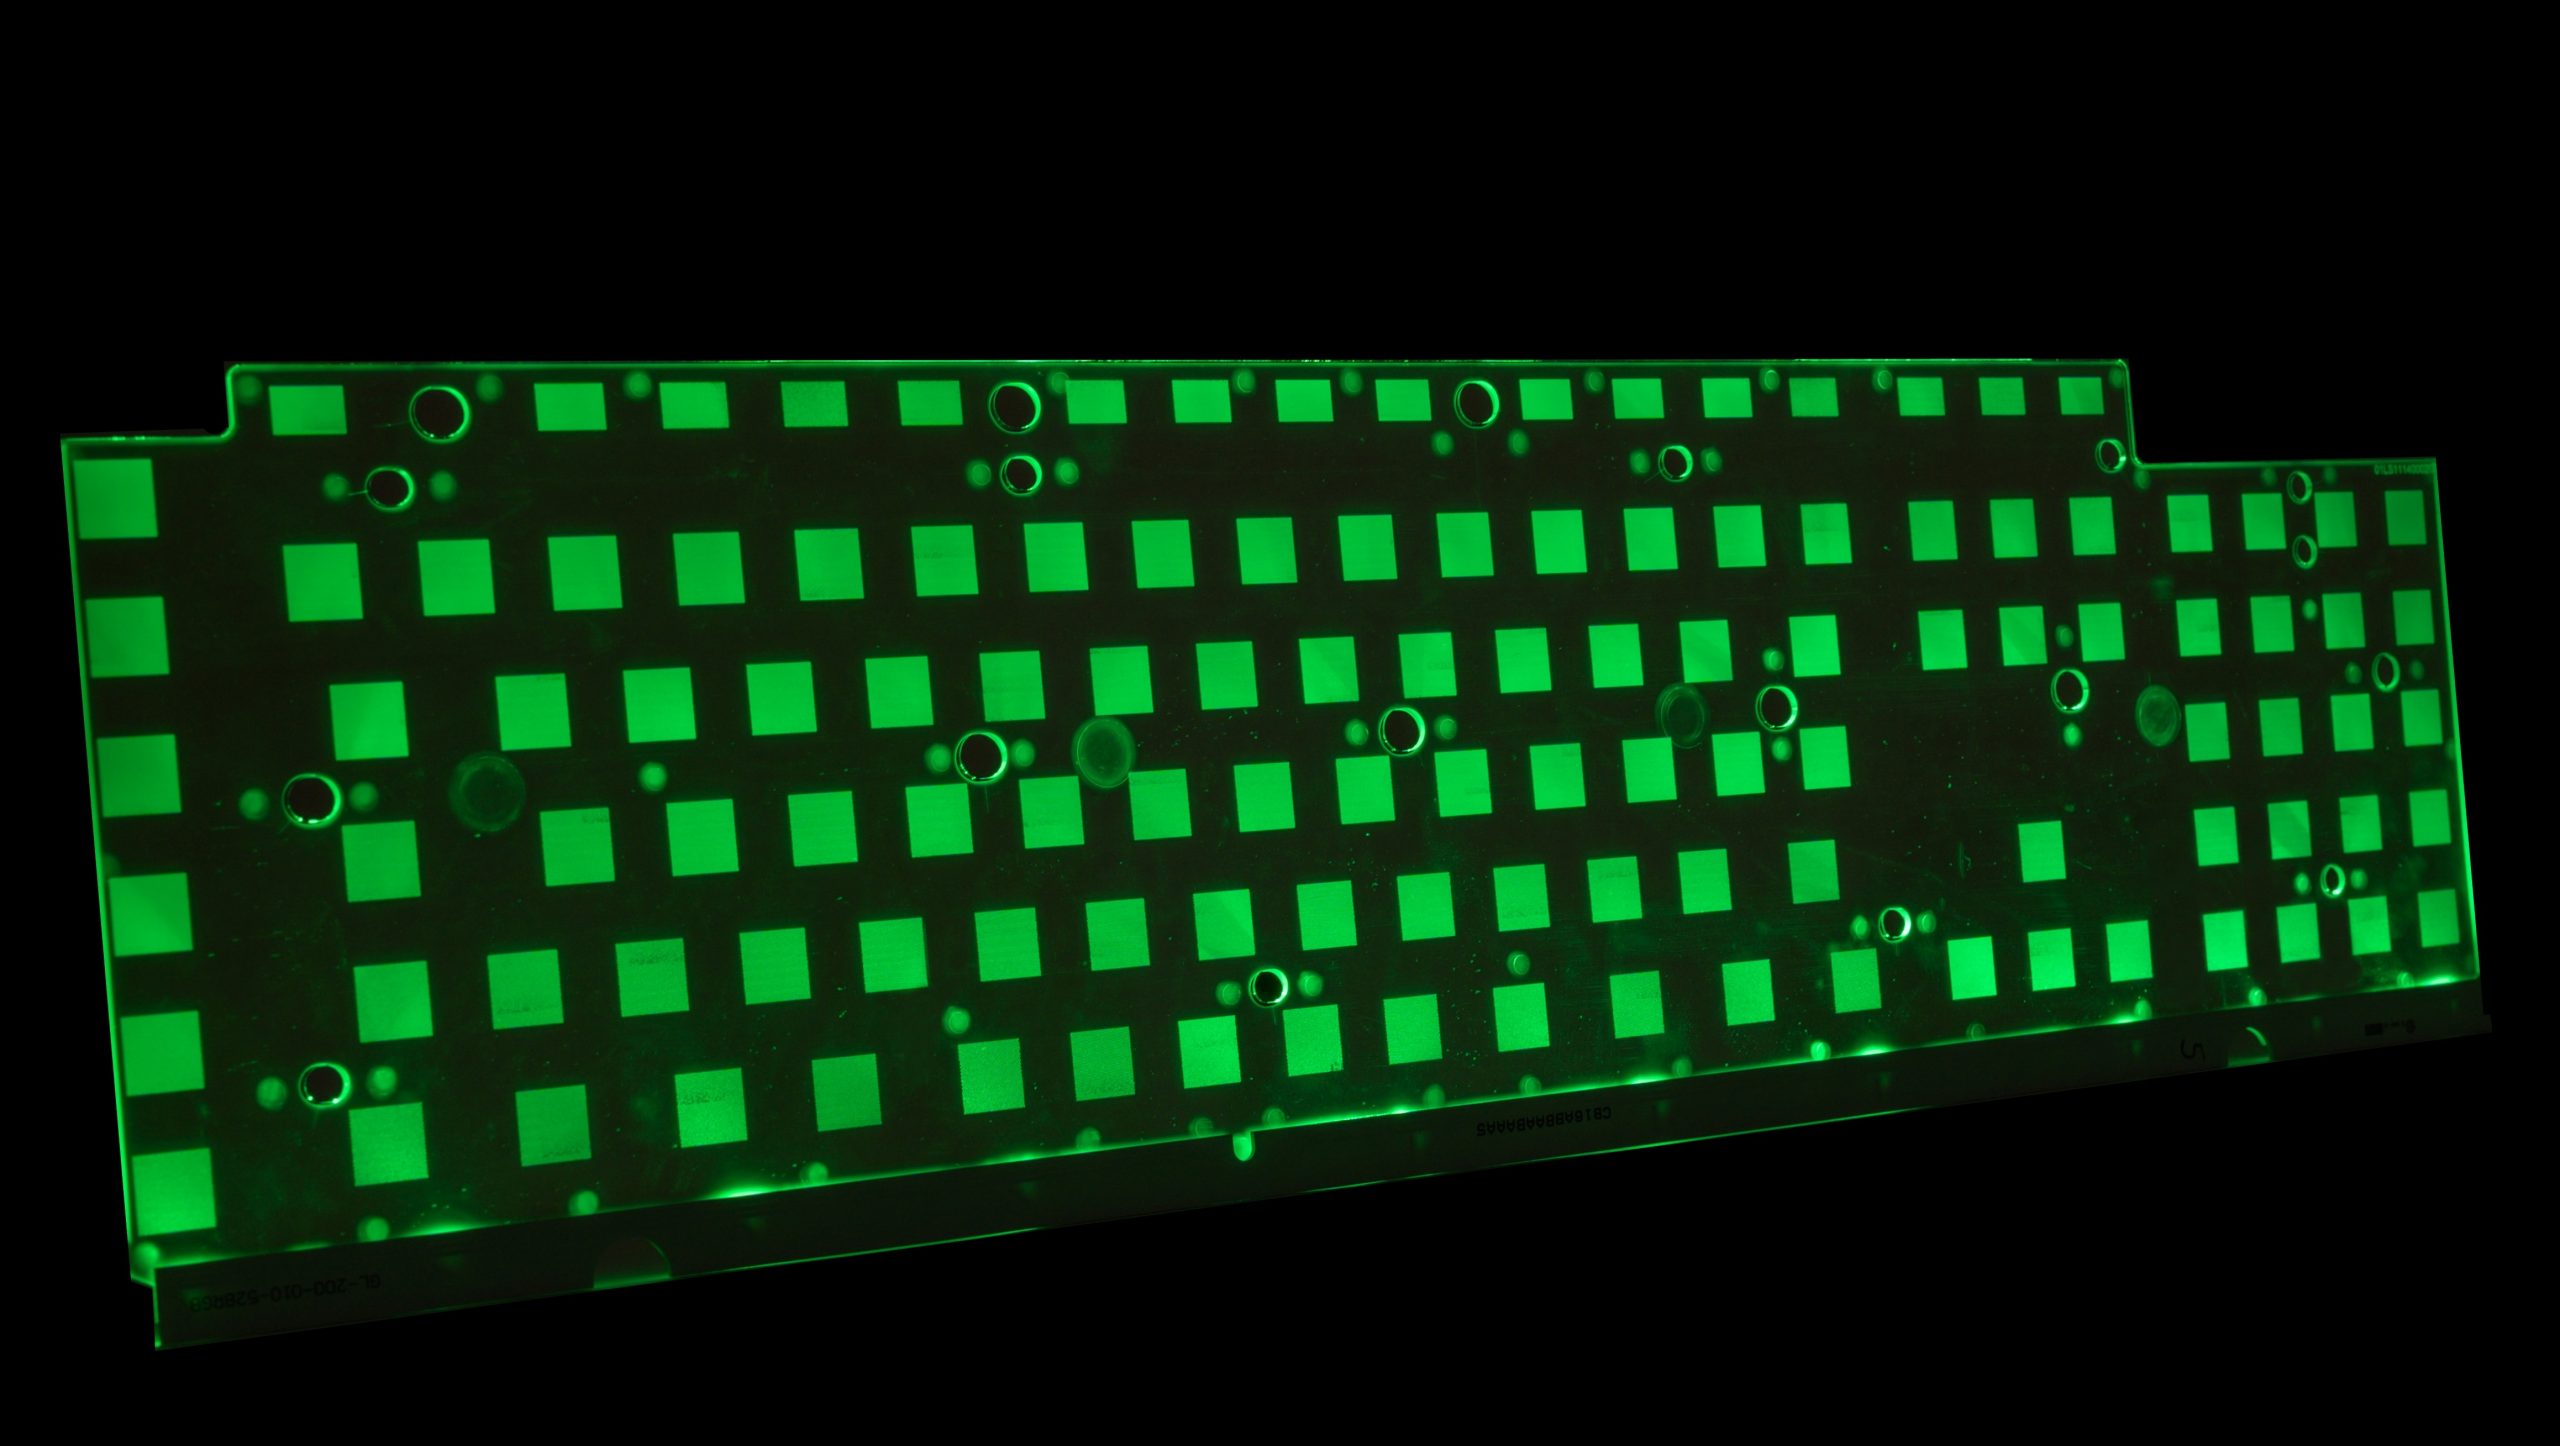 Green lighted keyboard for a computer